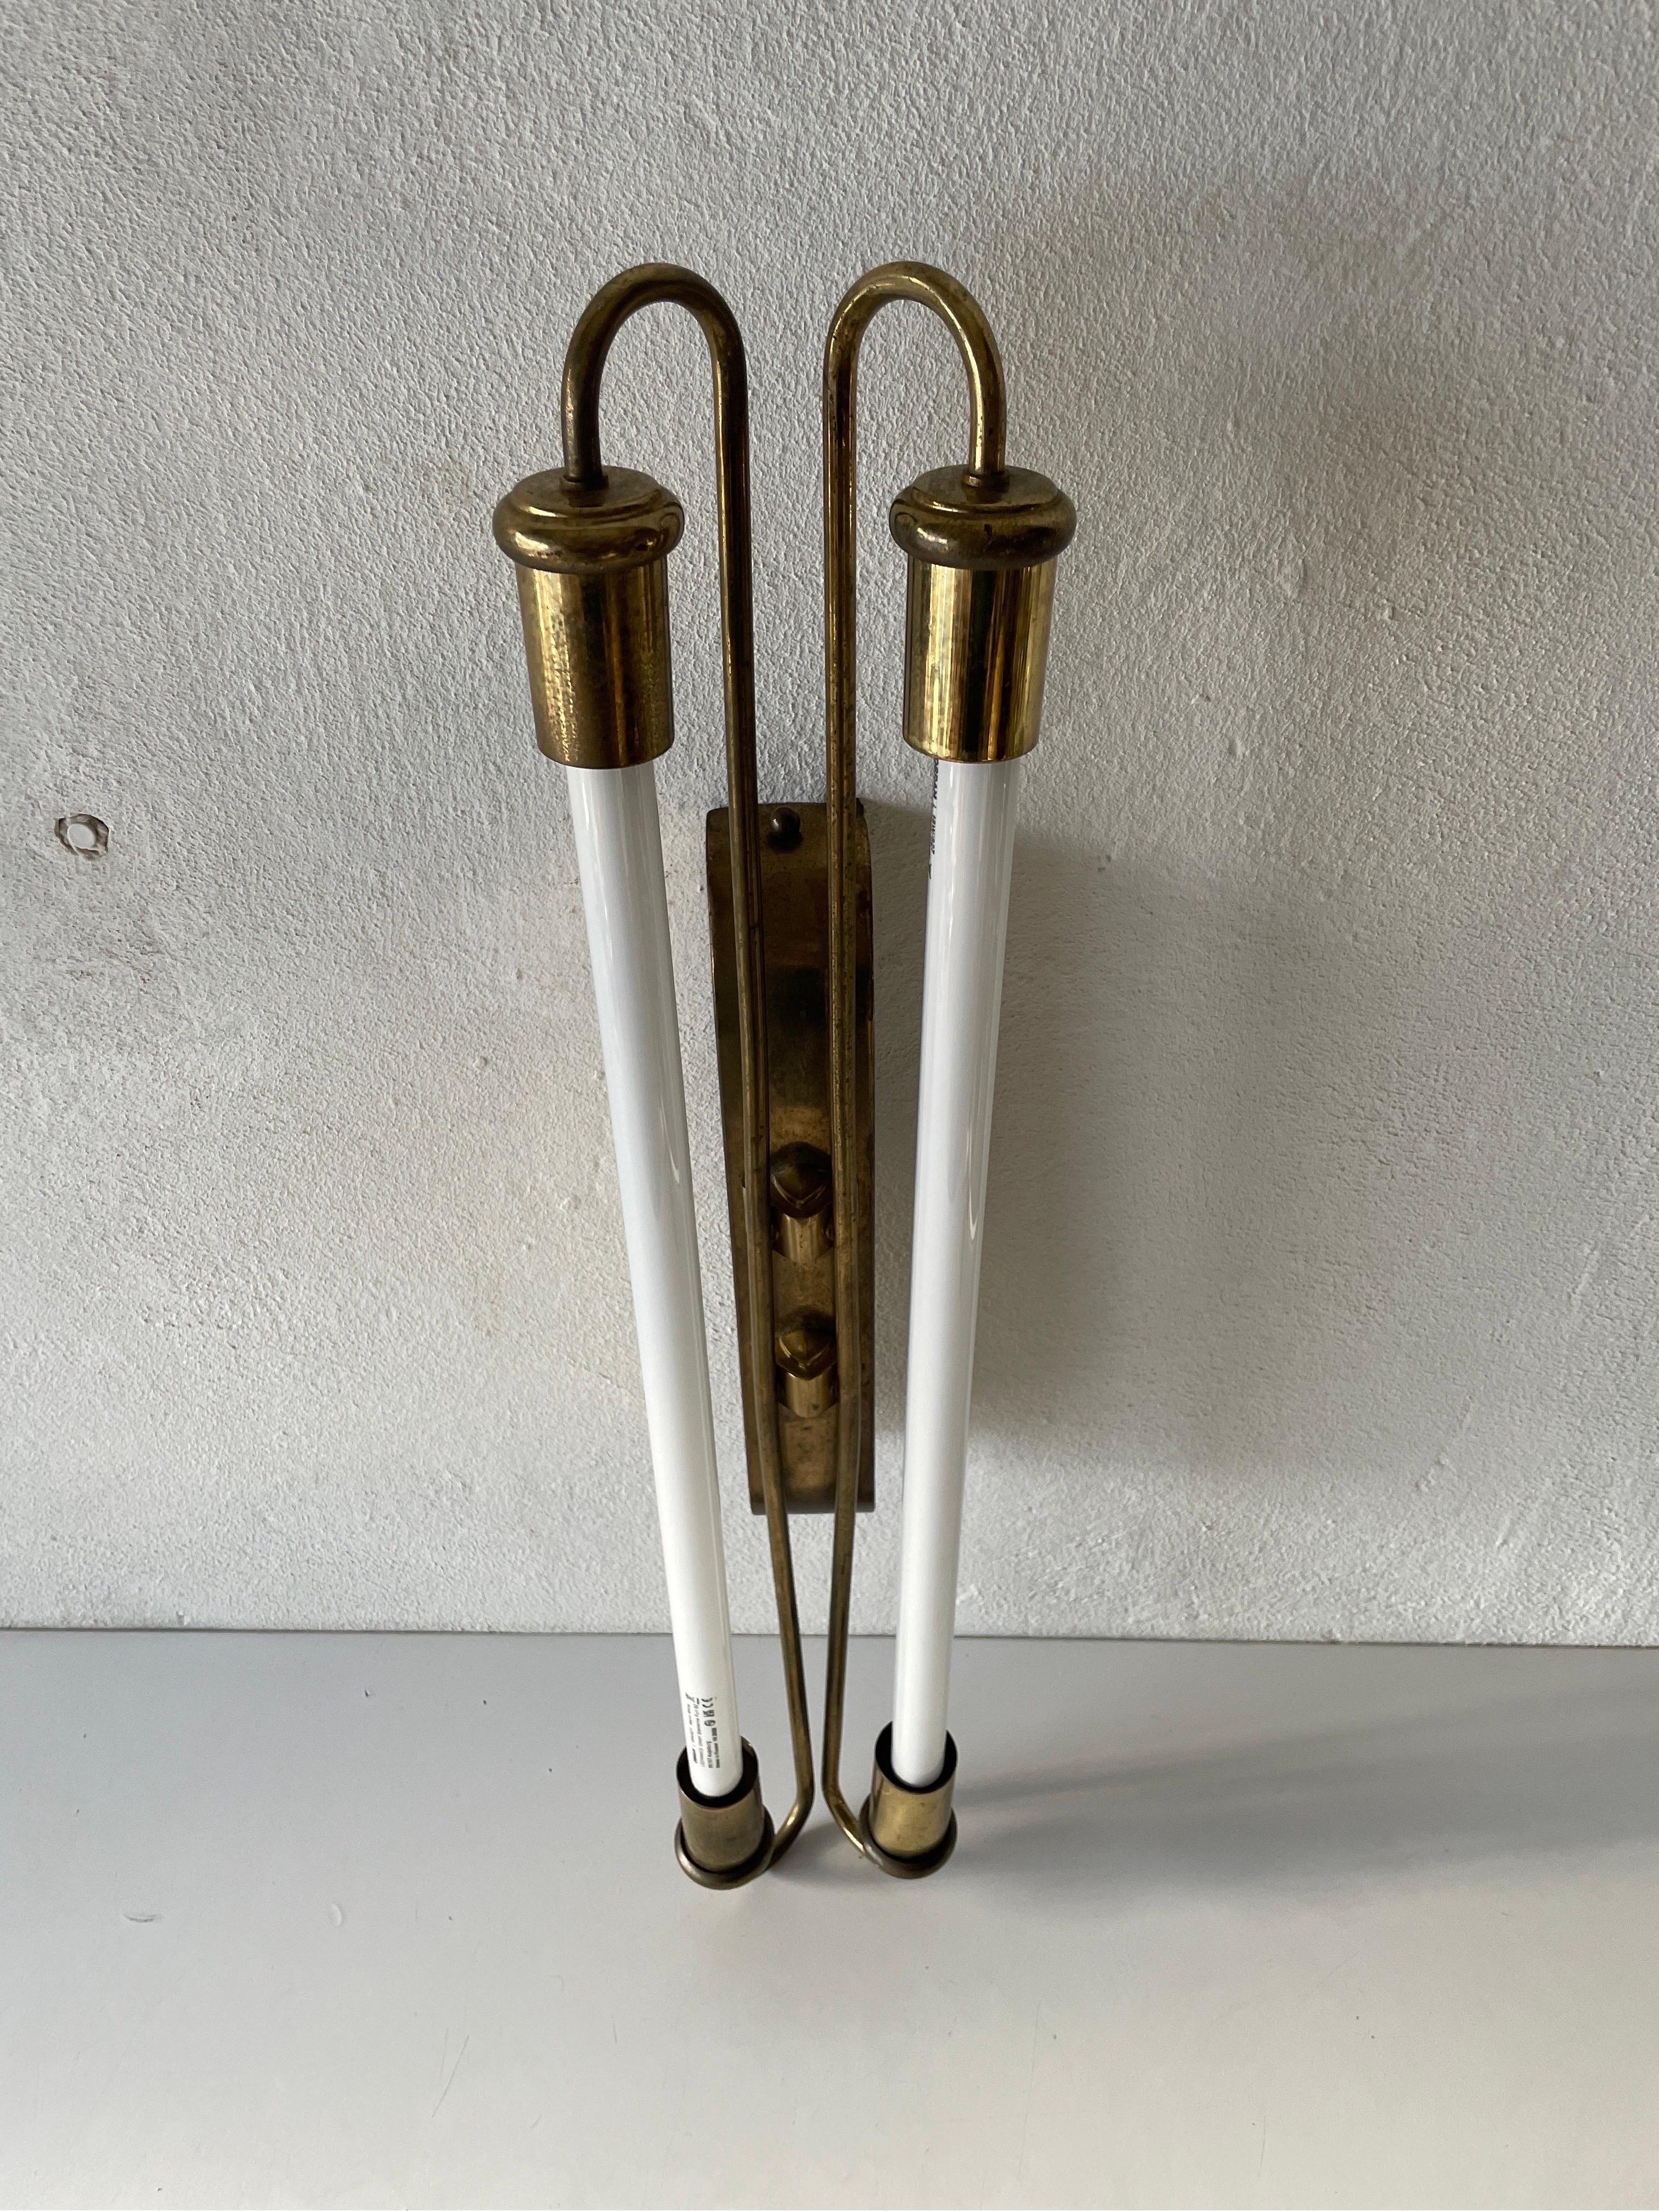 Art Deco Brass Industrial Cinema Sconce with two fluorescent Tubes, 1930s, Germany

Industrial wall lamp with two fluorescent Tubes
Halogen Fluorescent tubes L18W or L20W

Lampshade is in very good vintage condition.

This lamp works with 2